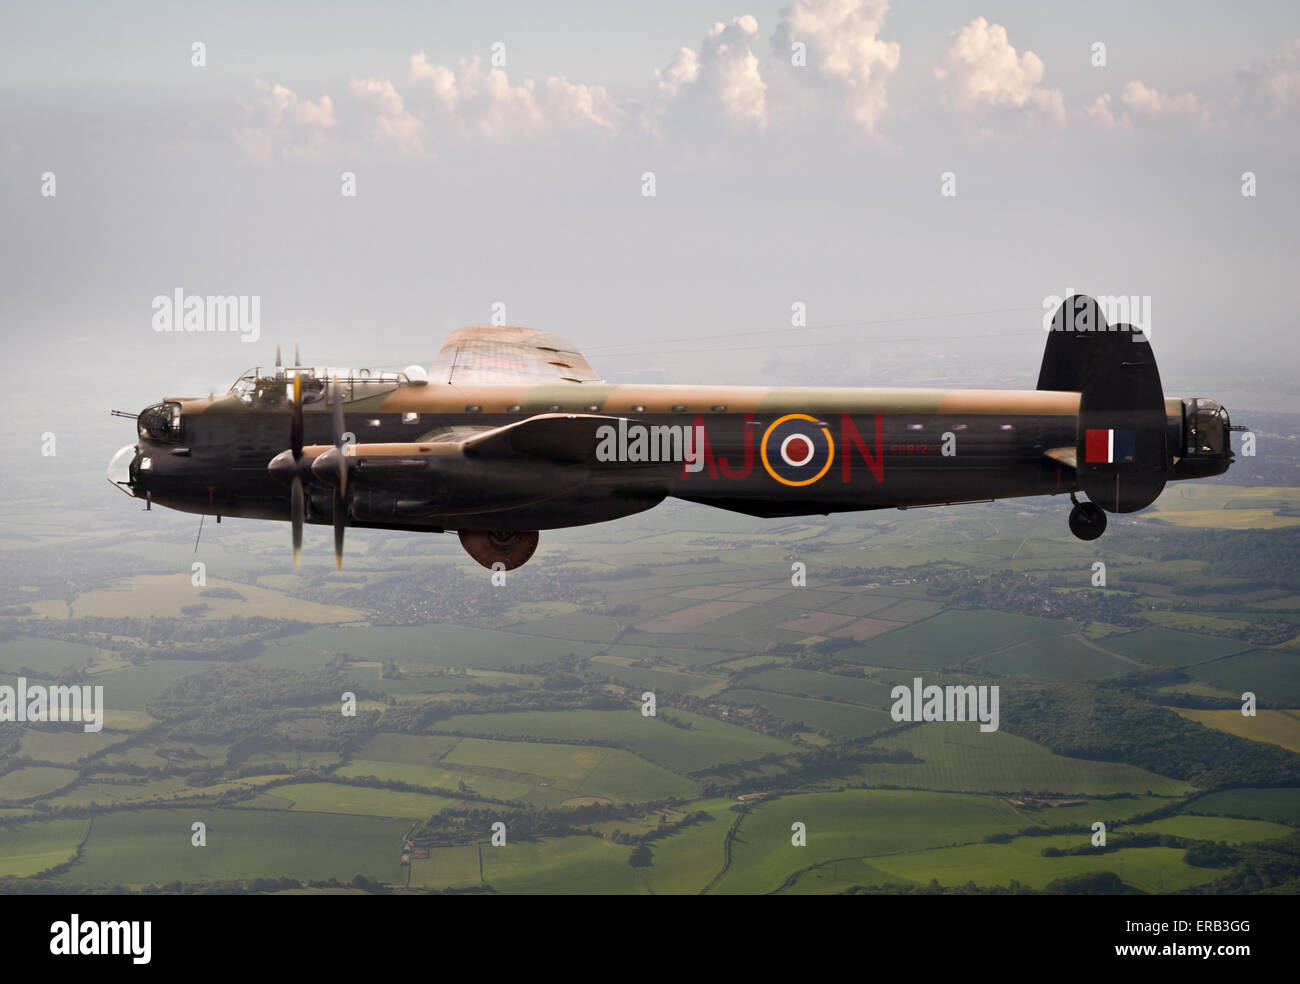 A specially adapted 'Dambuster' Lancaster bomber, Type 464 (Provisioning), ED912/G, coded AJ-N, as flown by Les Knight. Stock Photo